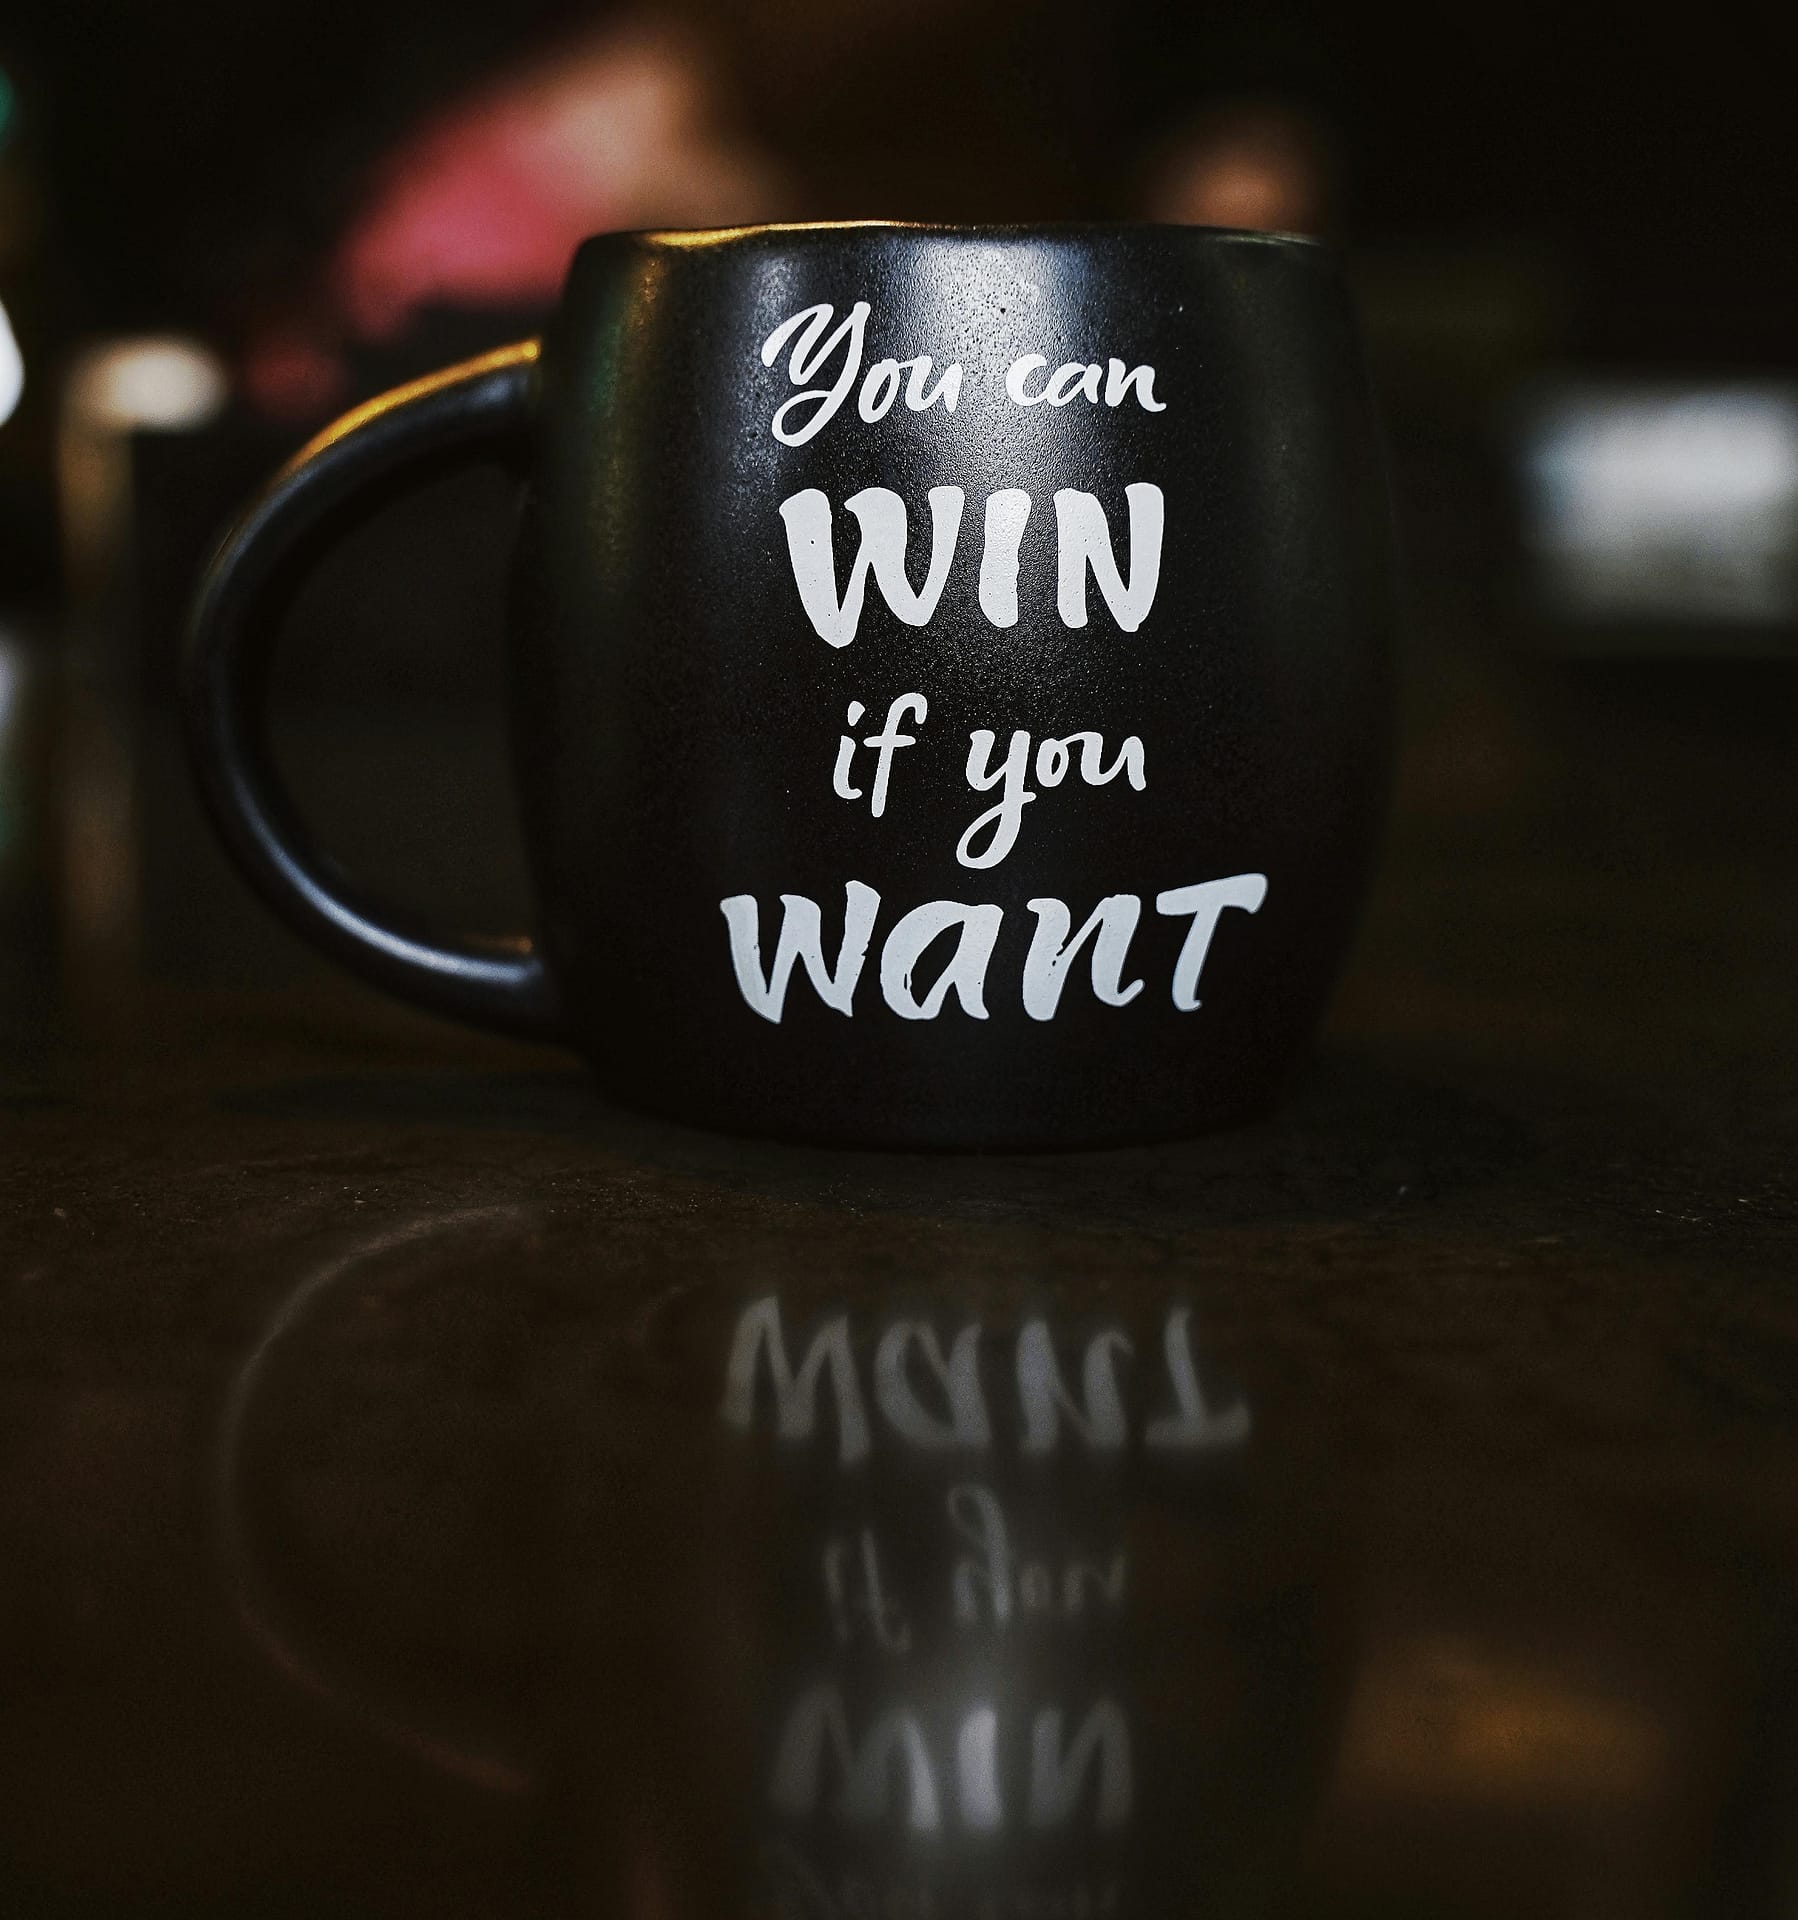 Image of cup a with positive statement written on it